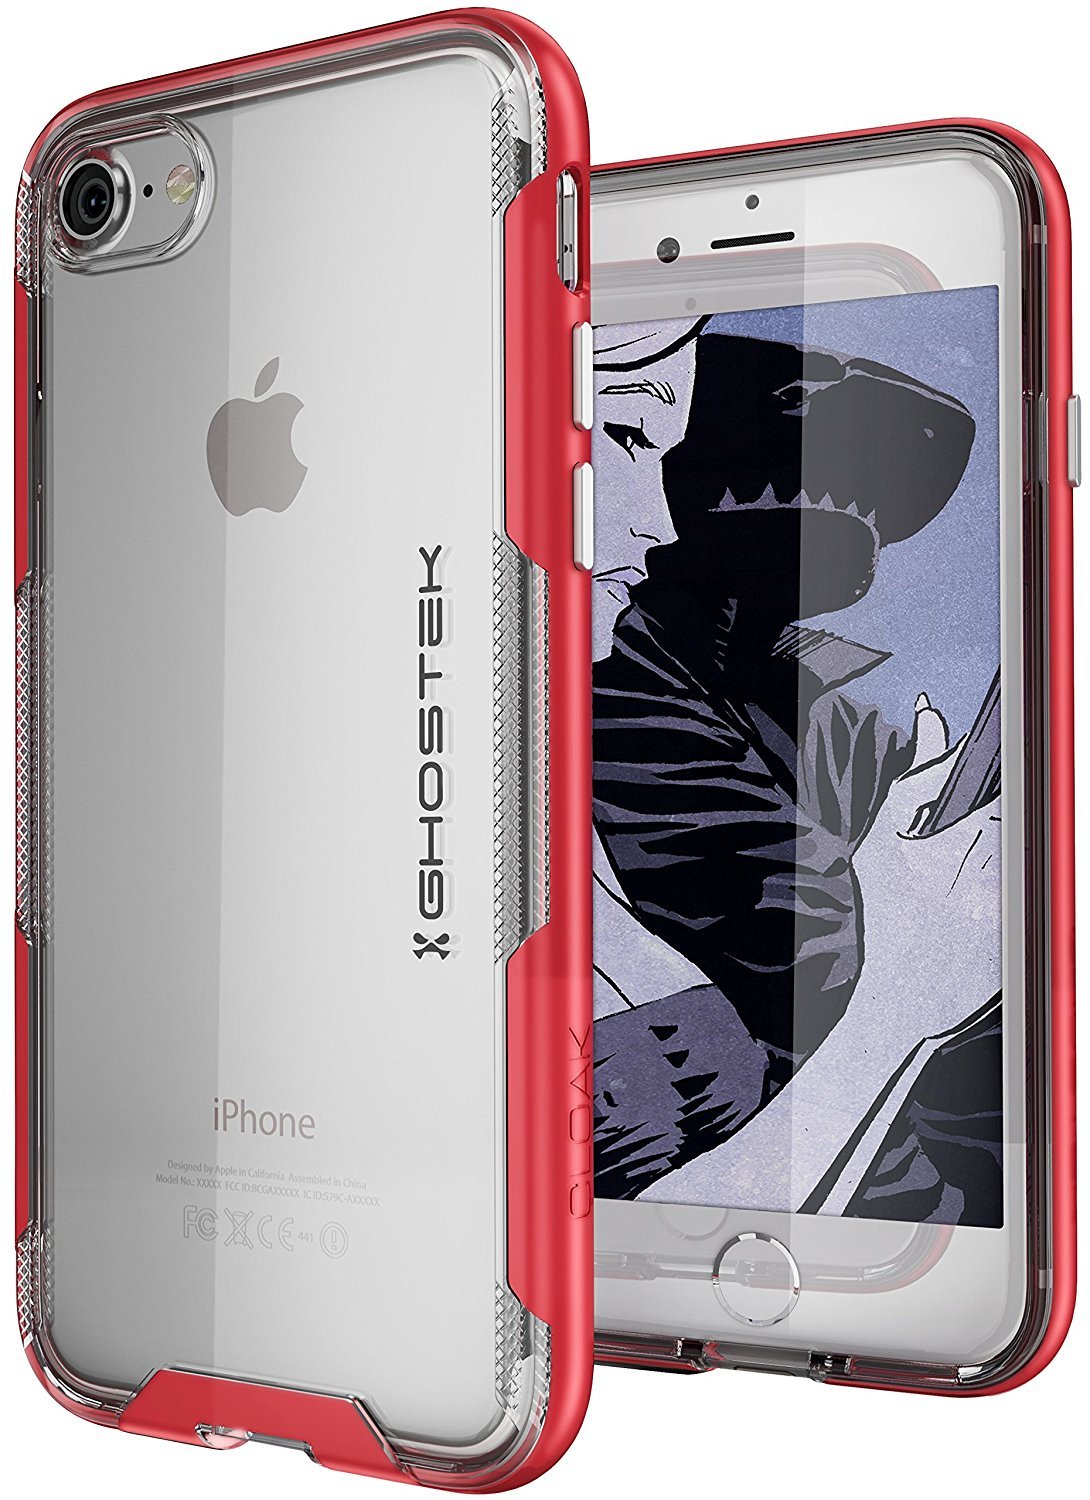 iPhone 7 Case, Ghostek Cloak 3 Series for iPhone 7 Clear Protective Case | Red